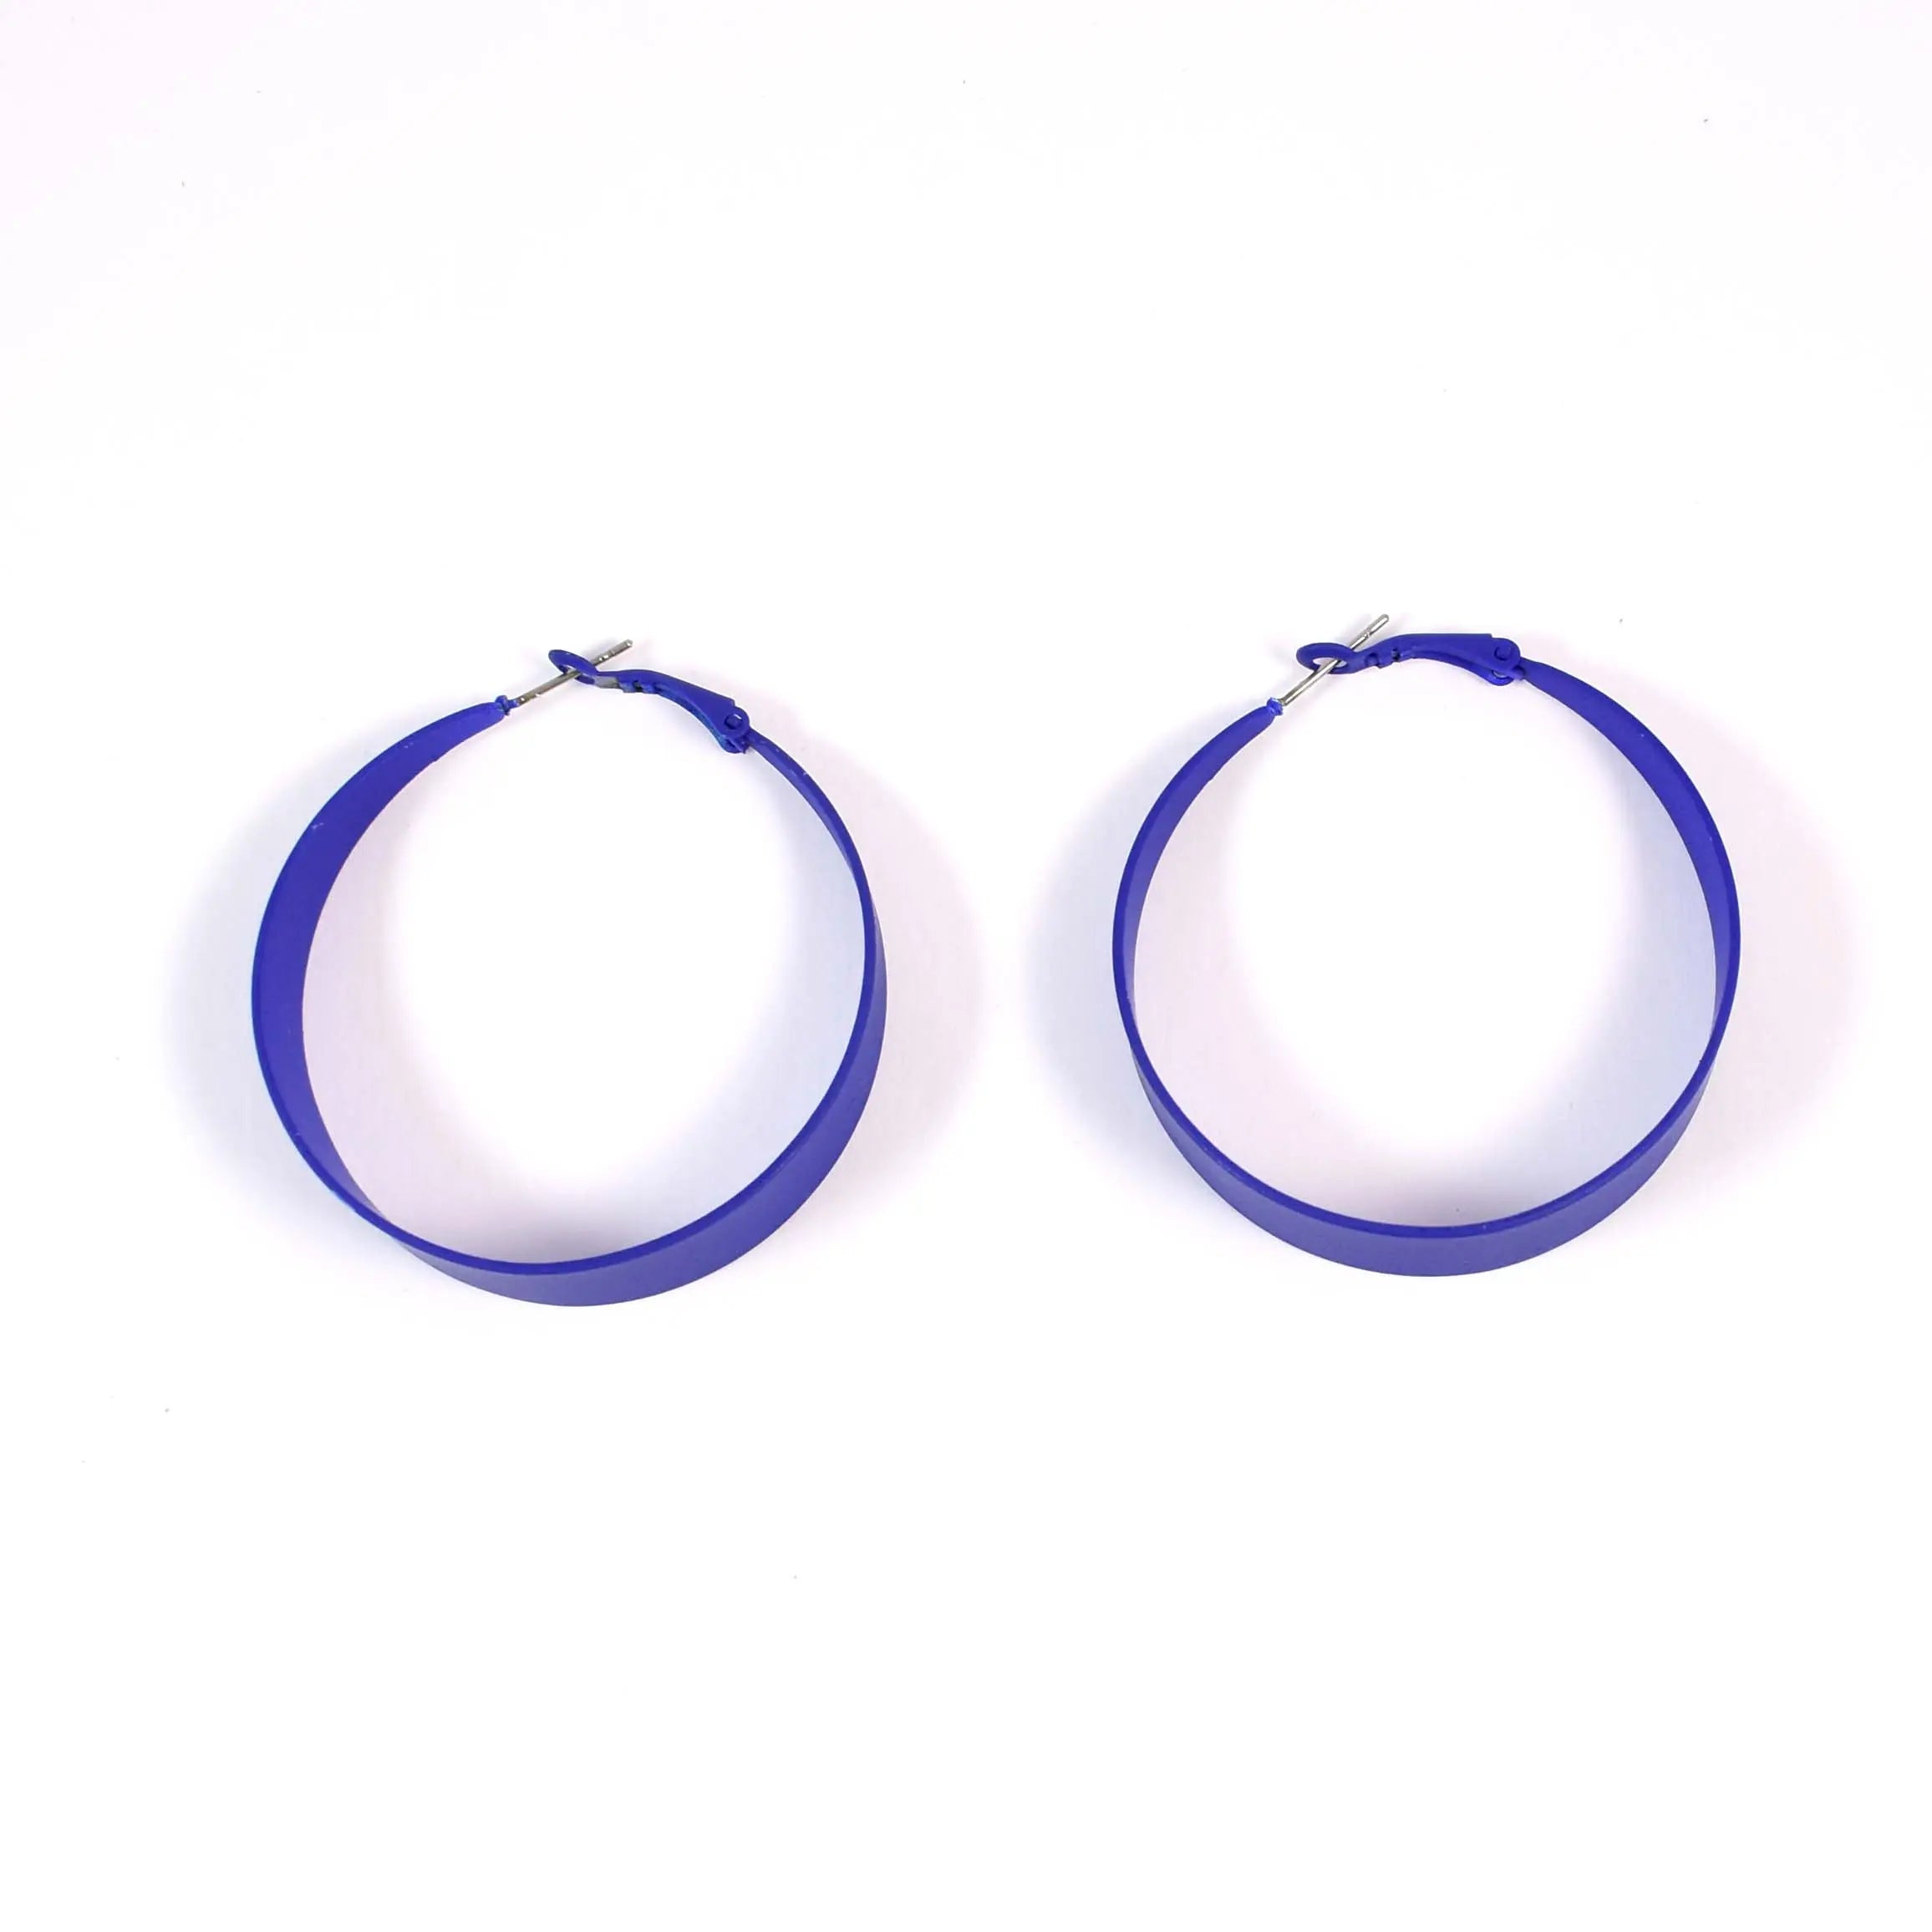 Details more than 231 big round earrings latest